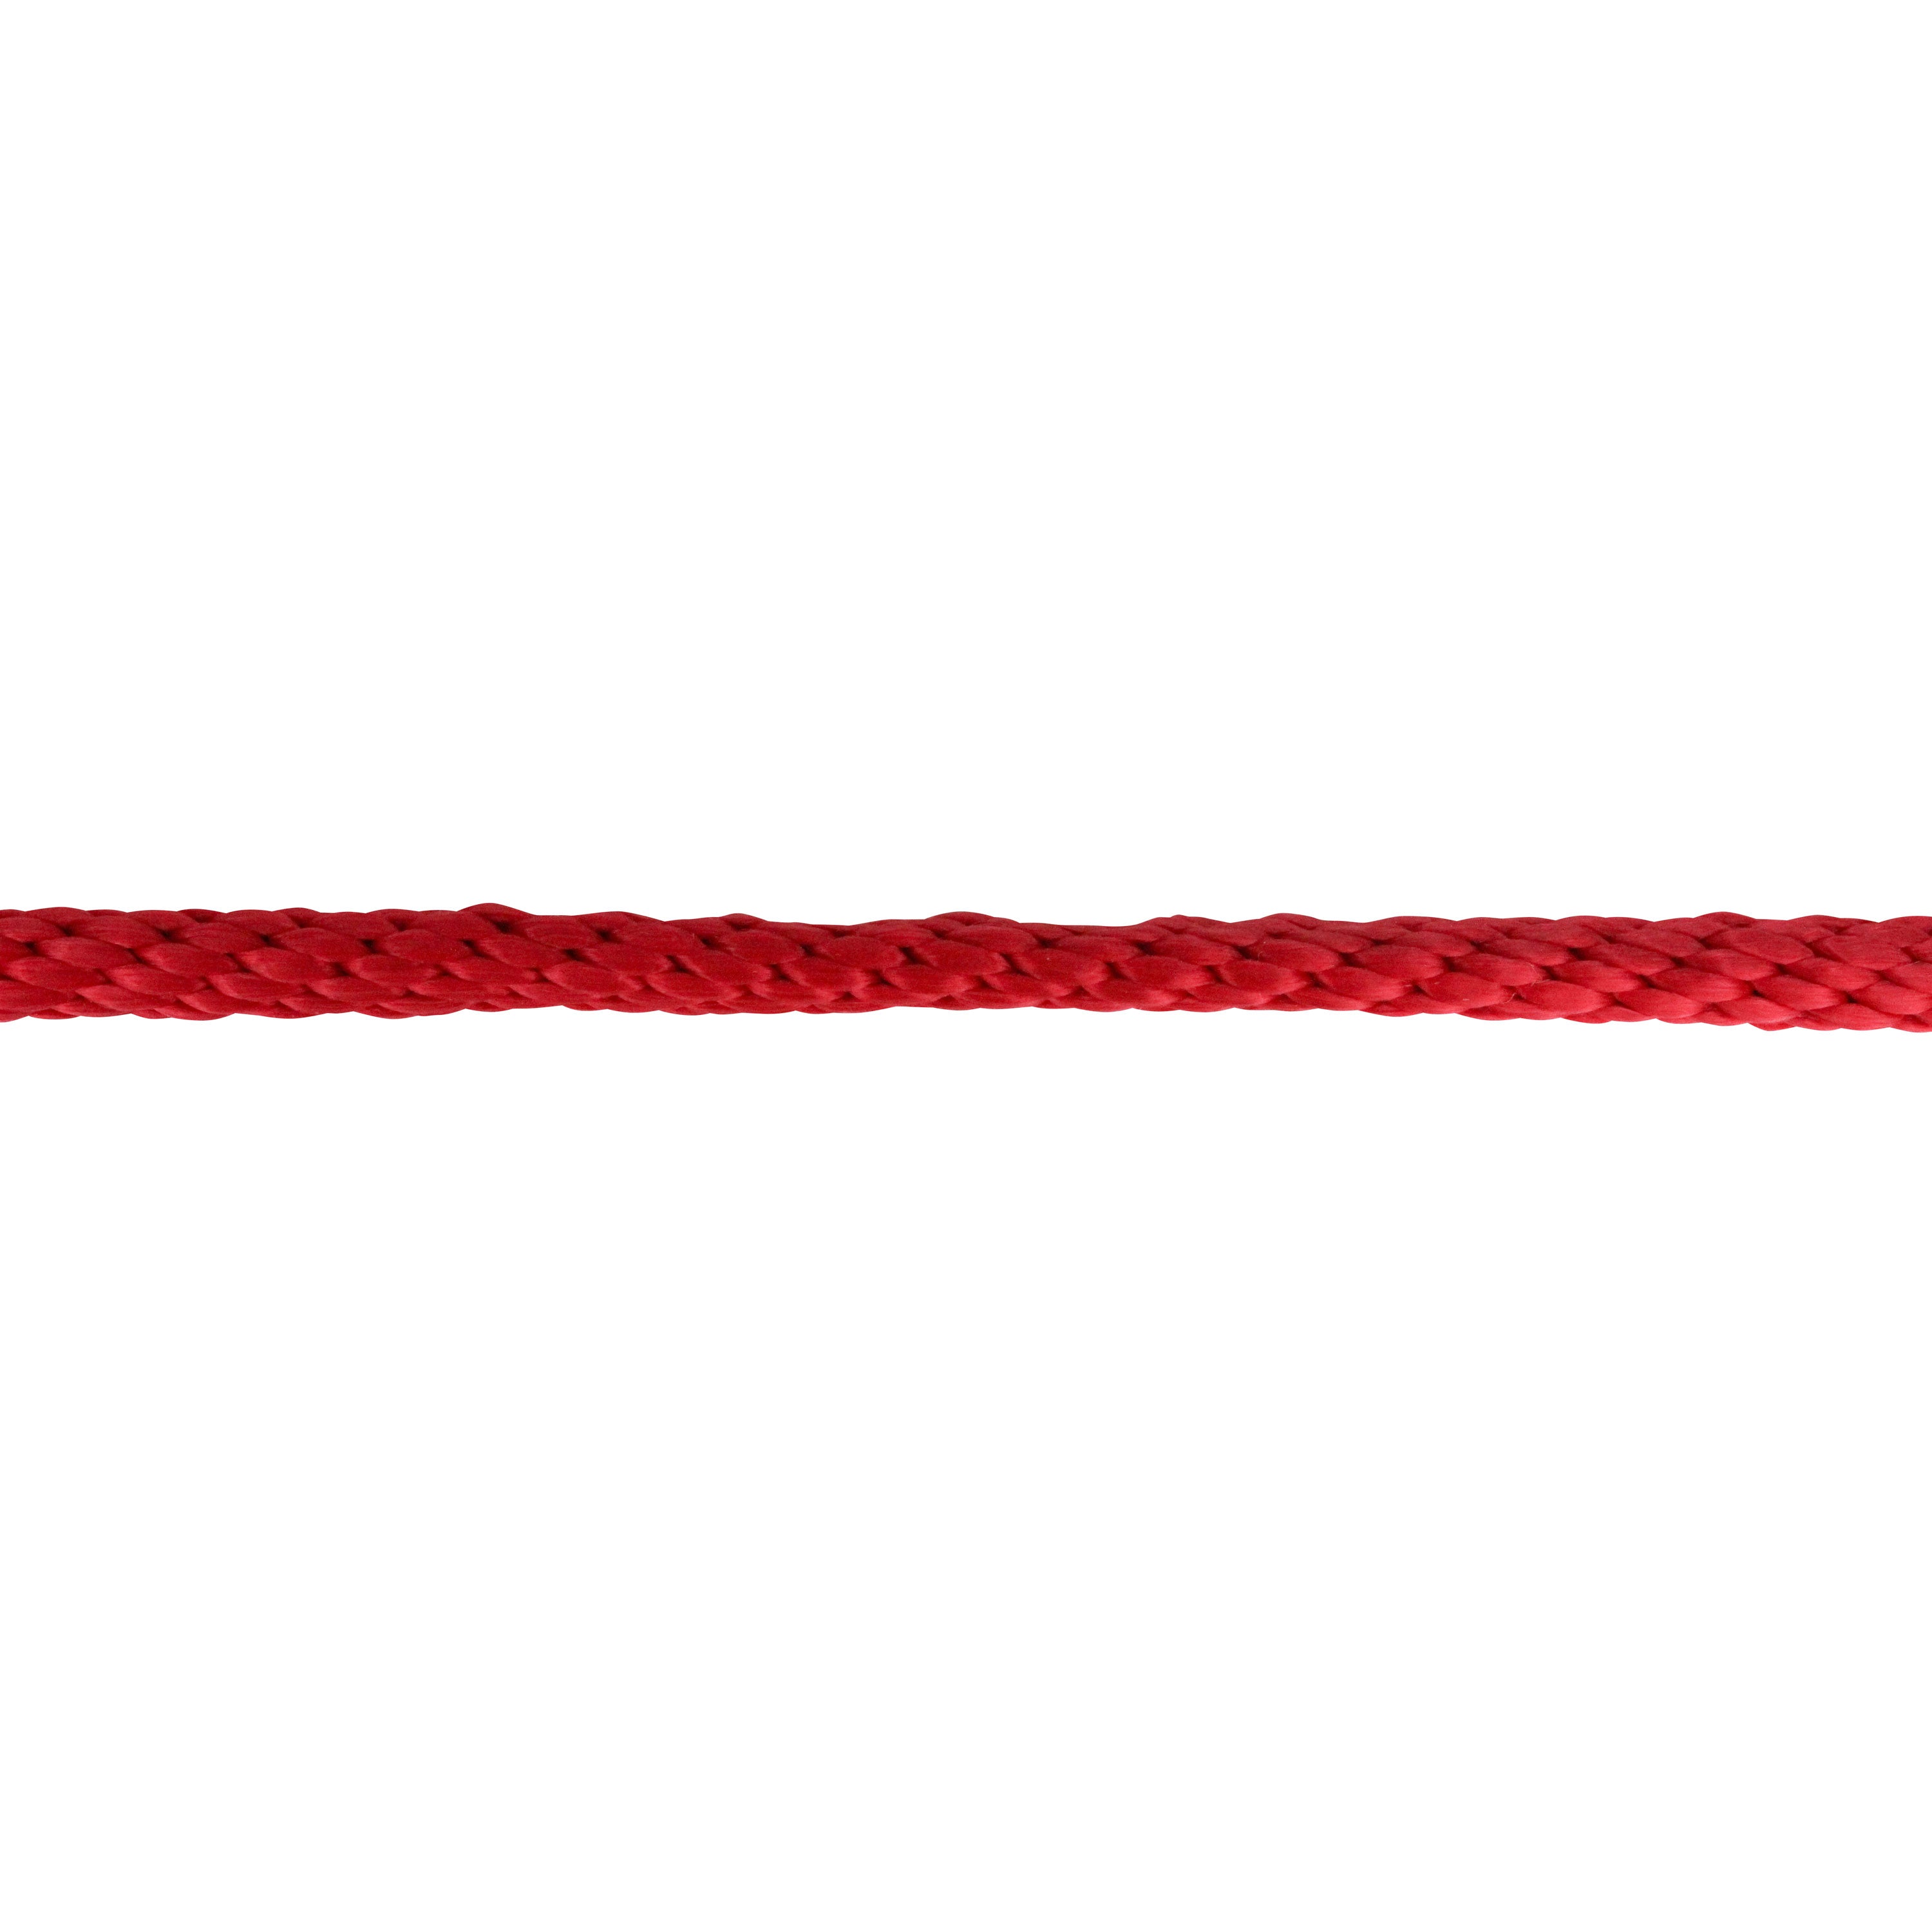 Extreme Max 3008.0129 Solid Braid MFP Utility Rope - 1/2" x 100', Red